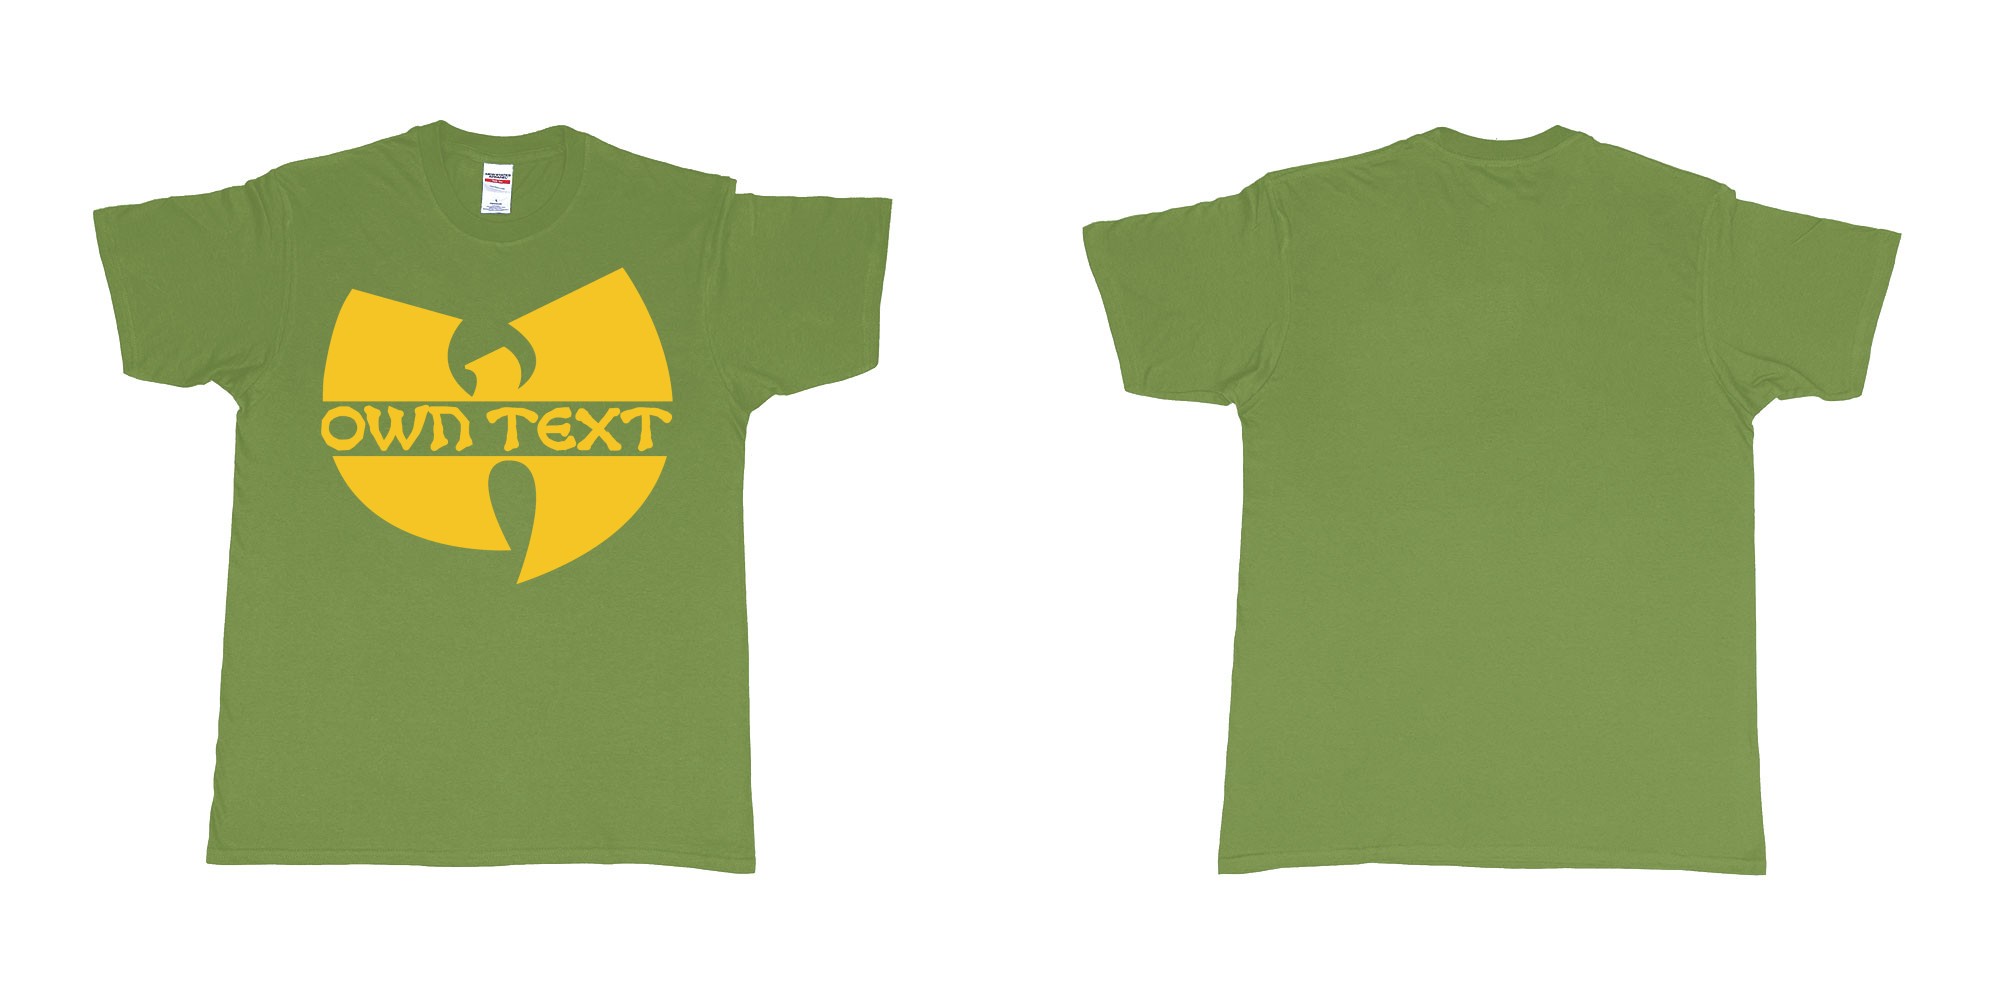 Custom tshirt design wu tang clan logo in fabric color military-green choice your own text made in Bali by The Pirate Way